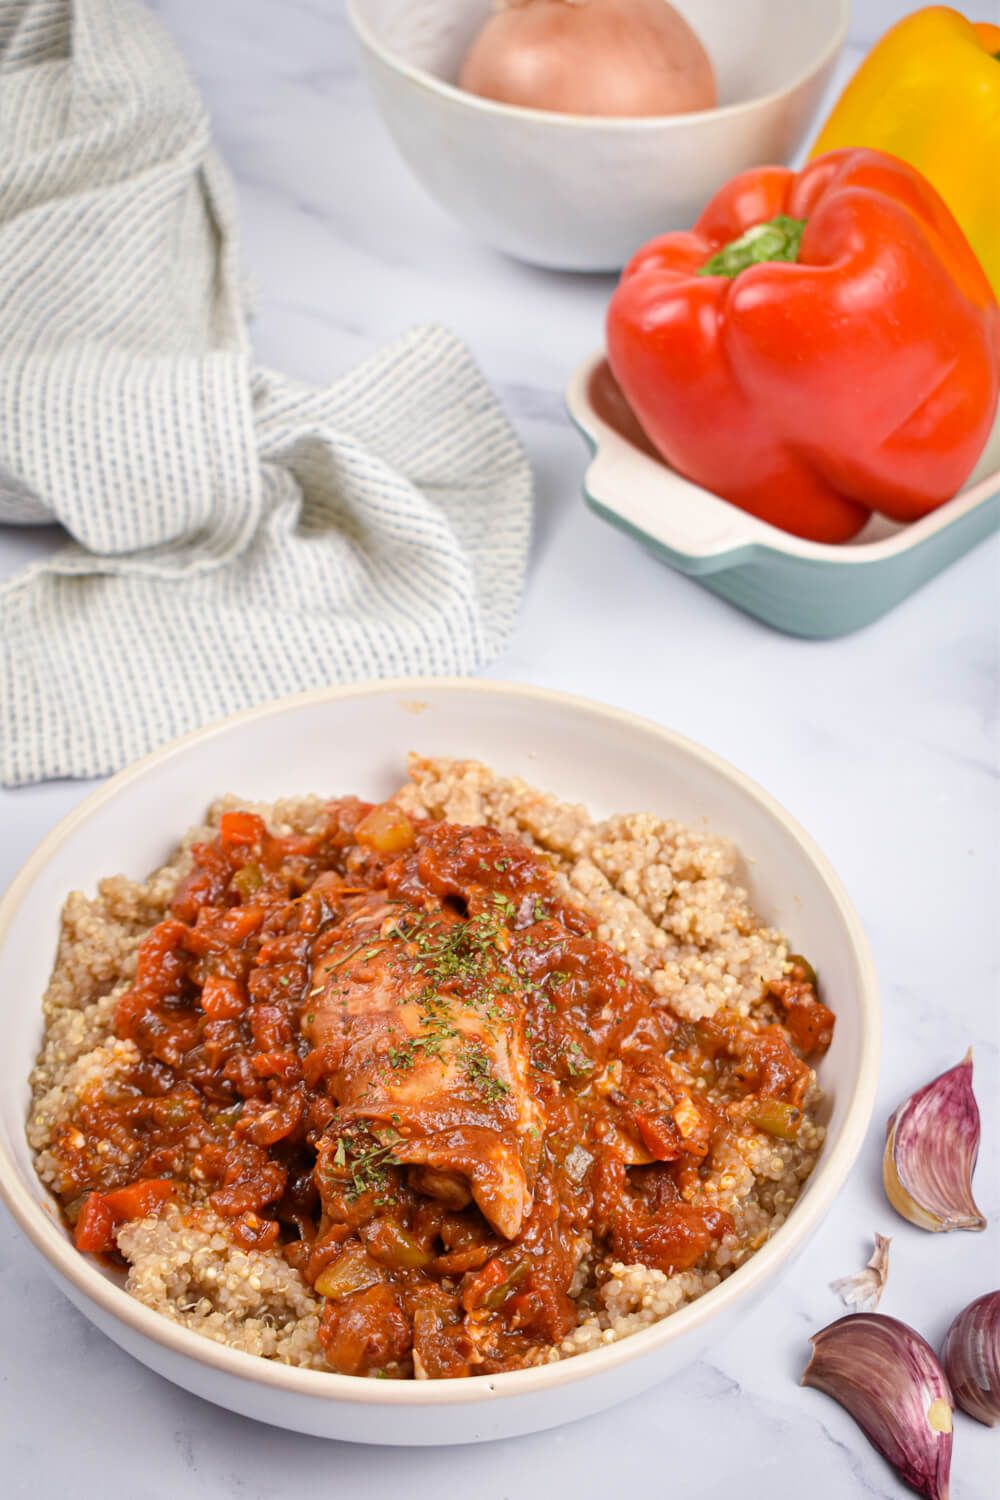 Chicken cacciatore with mushrooms, peppers, and chicken in a bowl with quinoa.